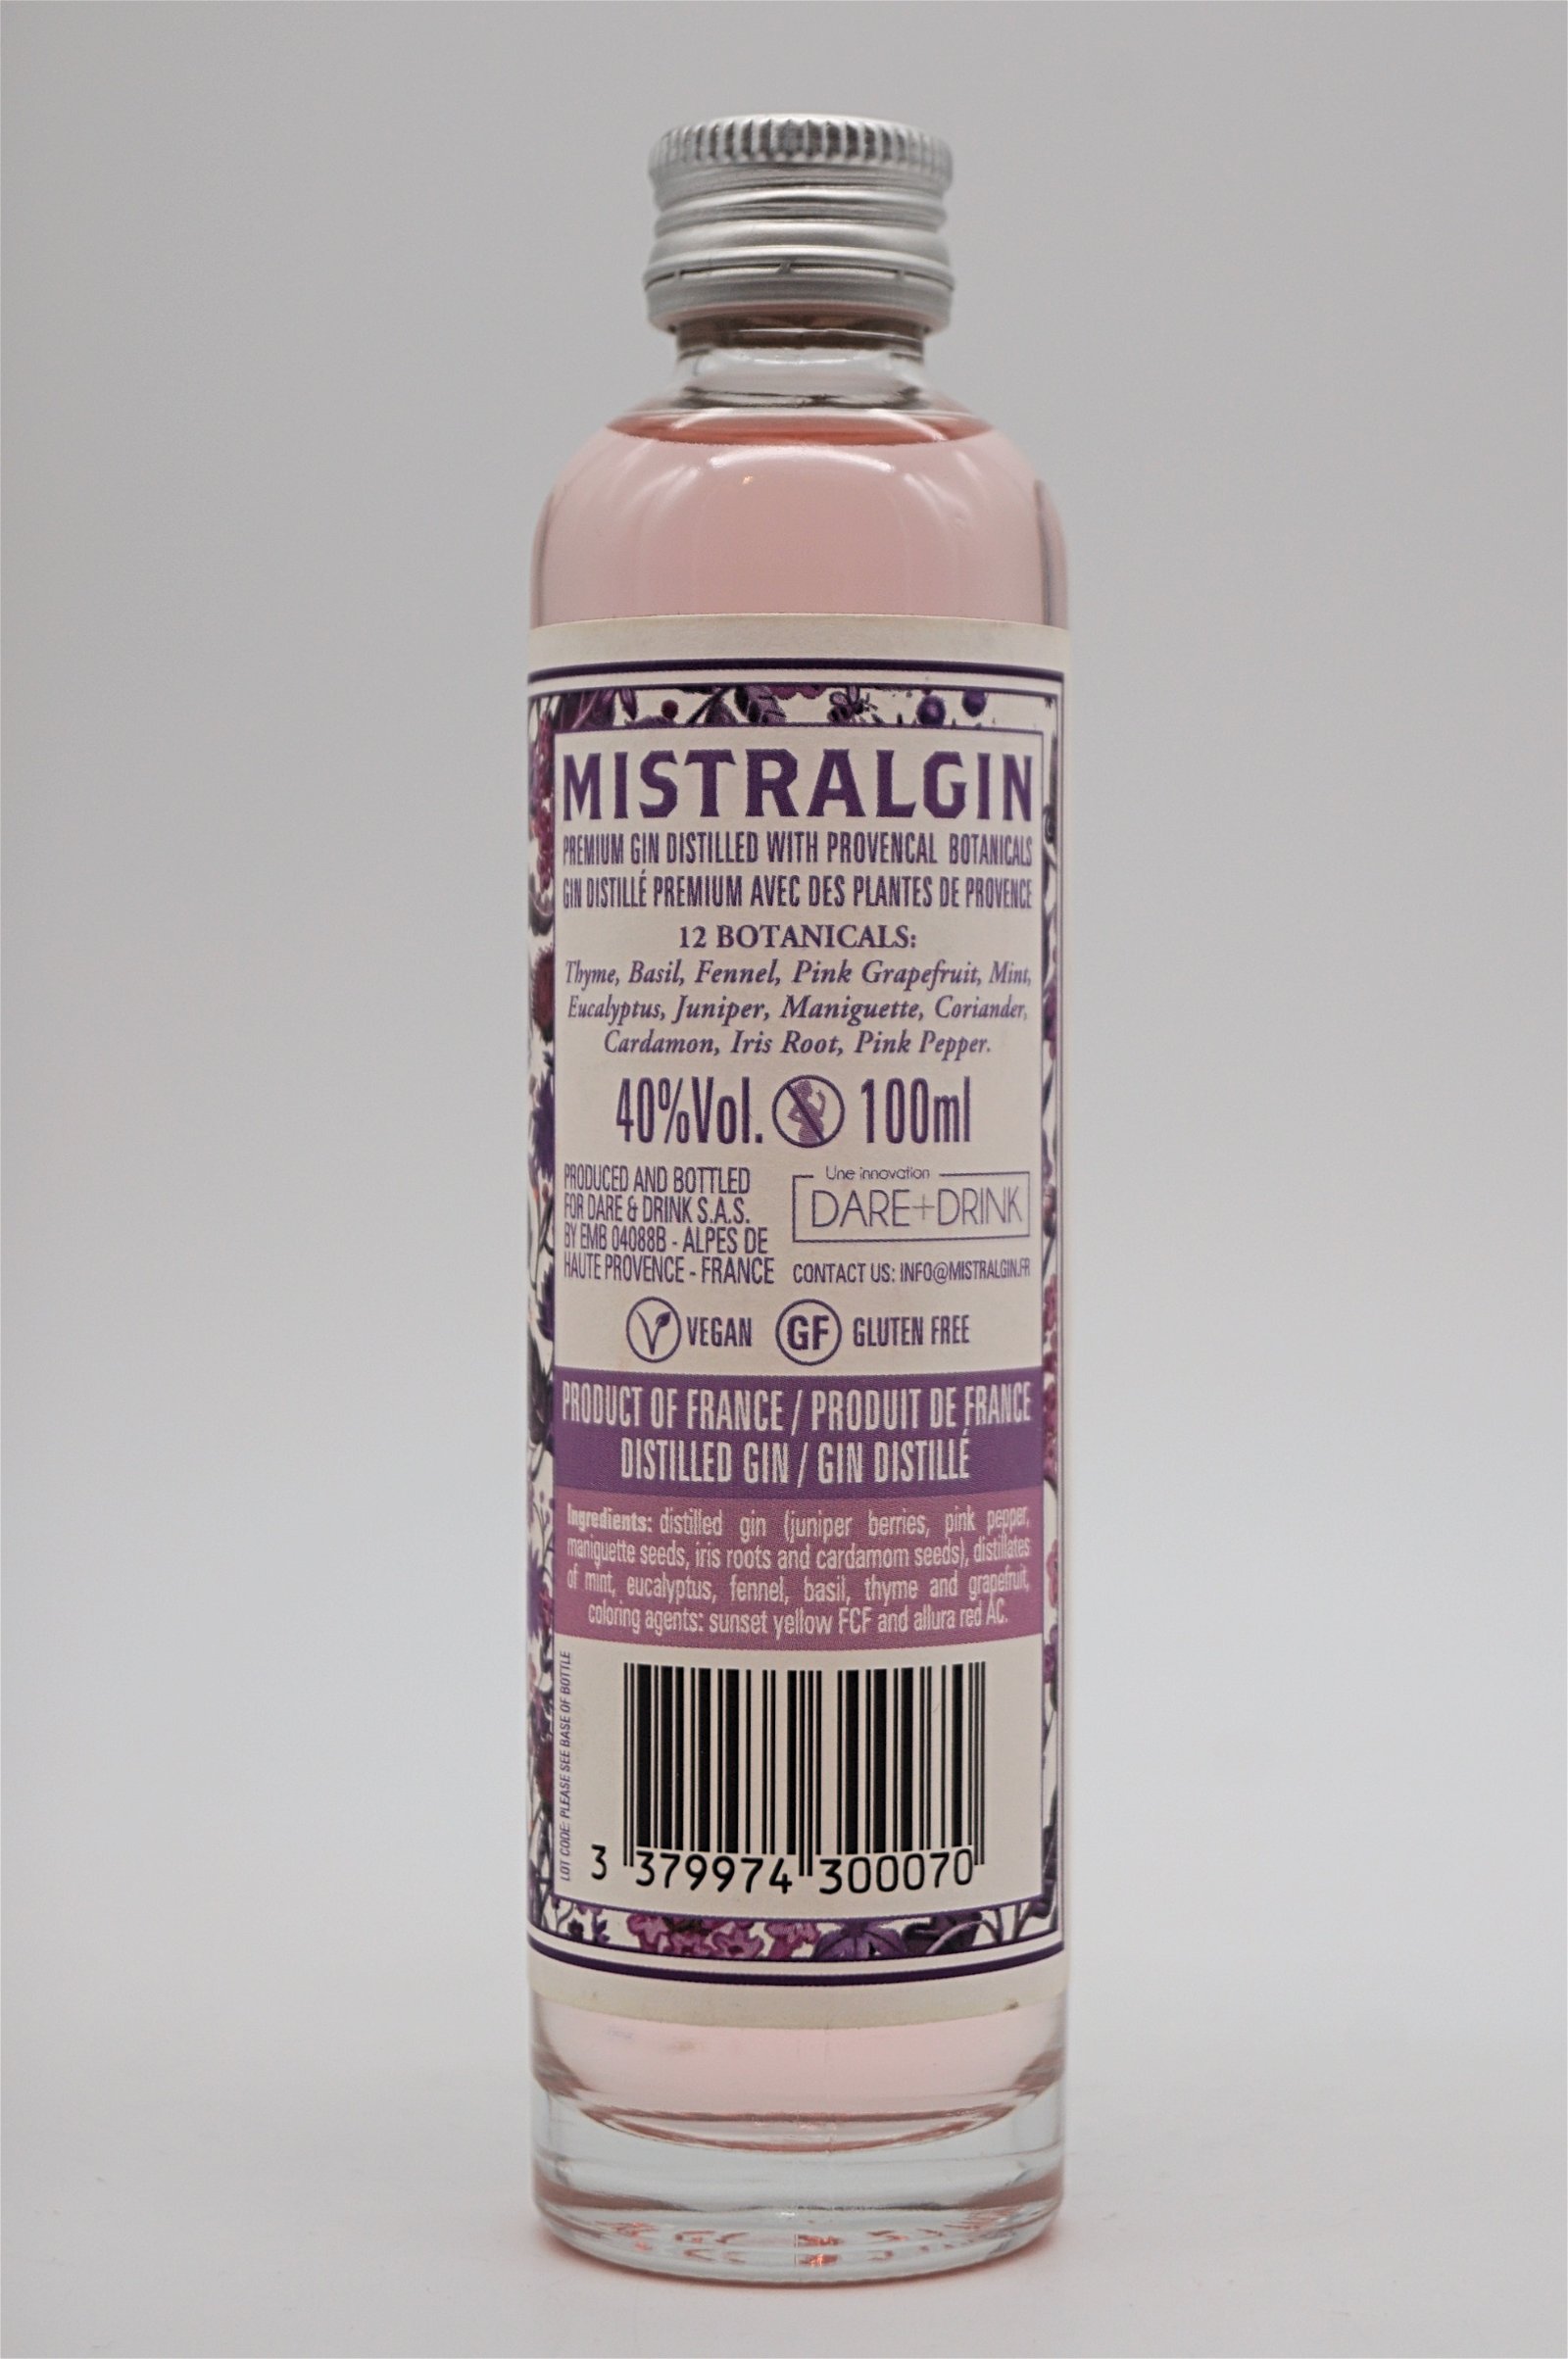 Mistral Handcrafted Small Batch Gin